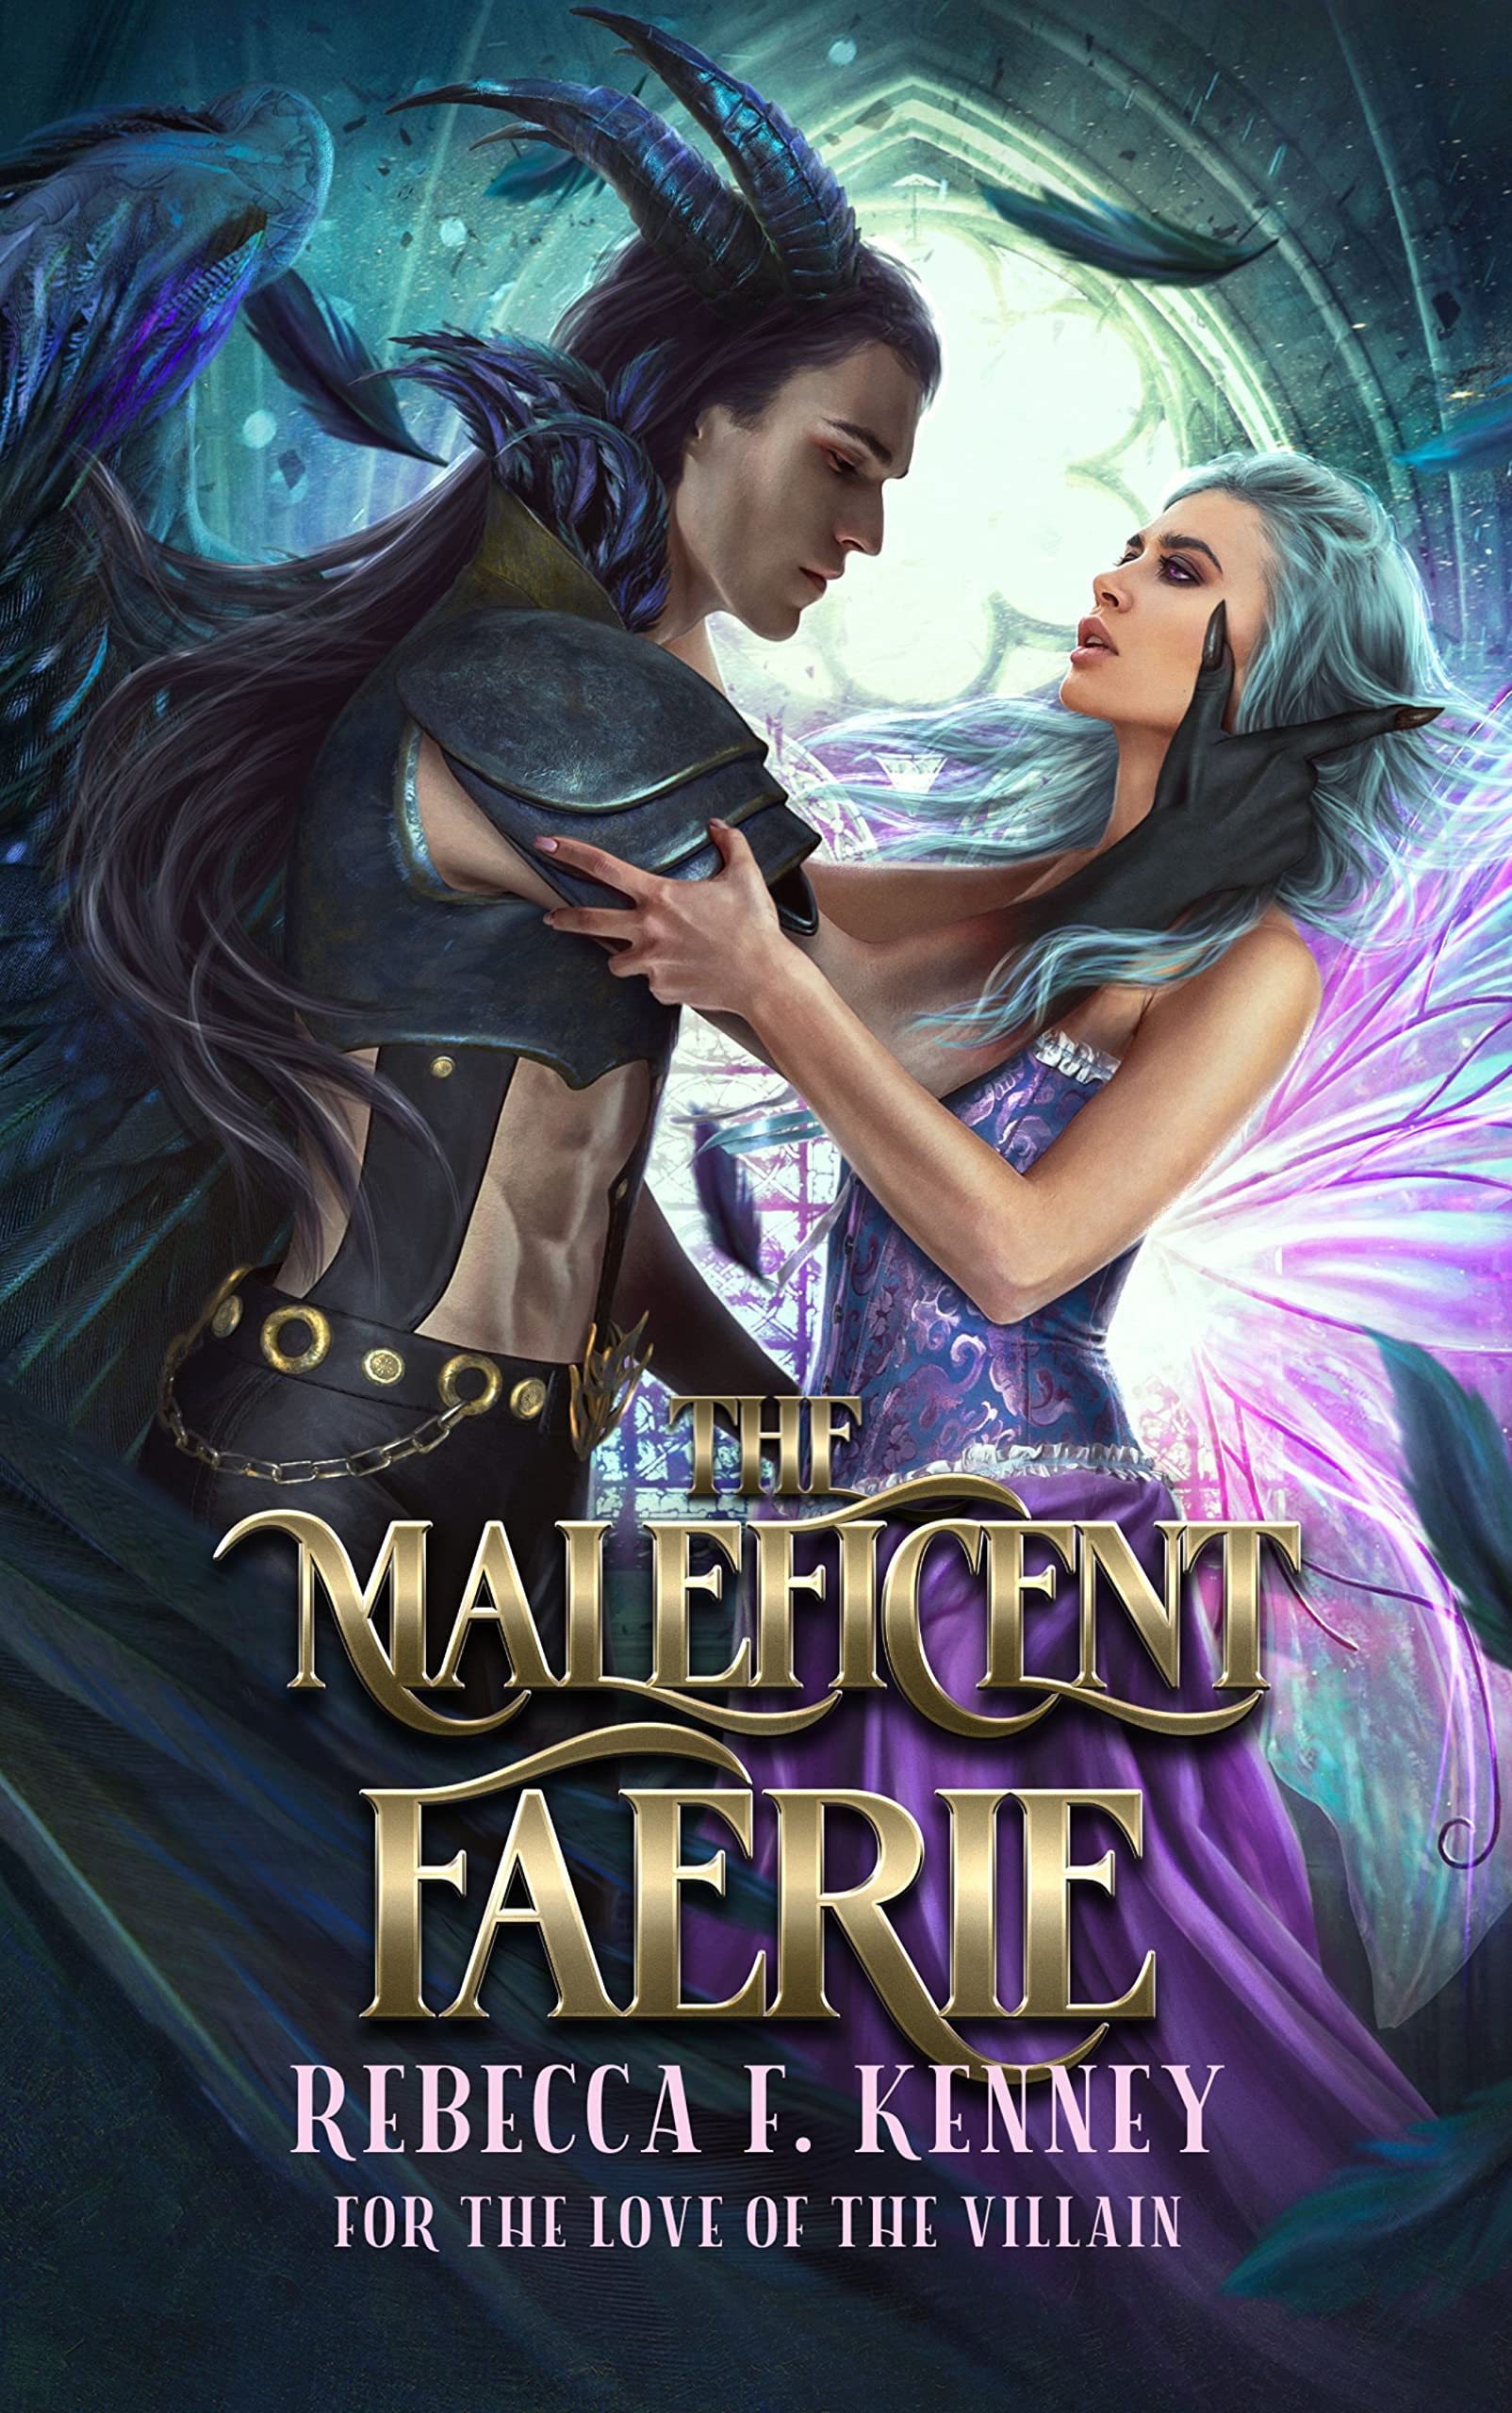 The Maleficent Faerie: A Sleeping Beauty Retelling (For the Love of the Villain Book 2)